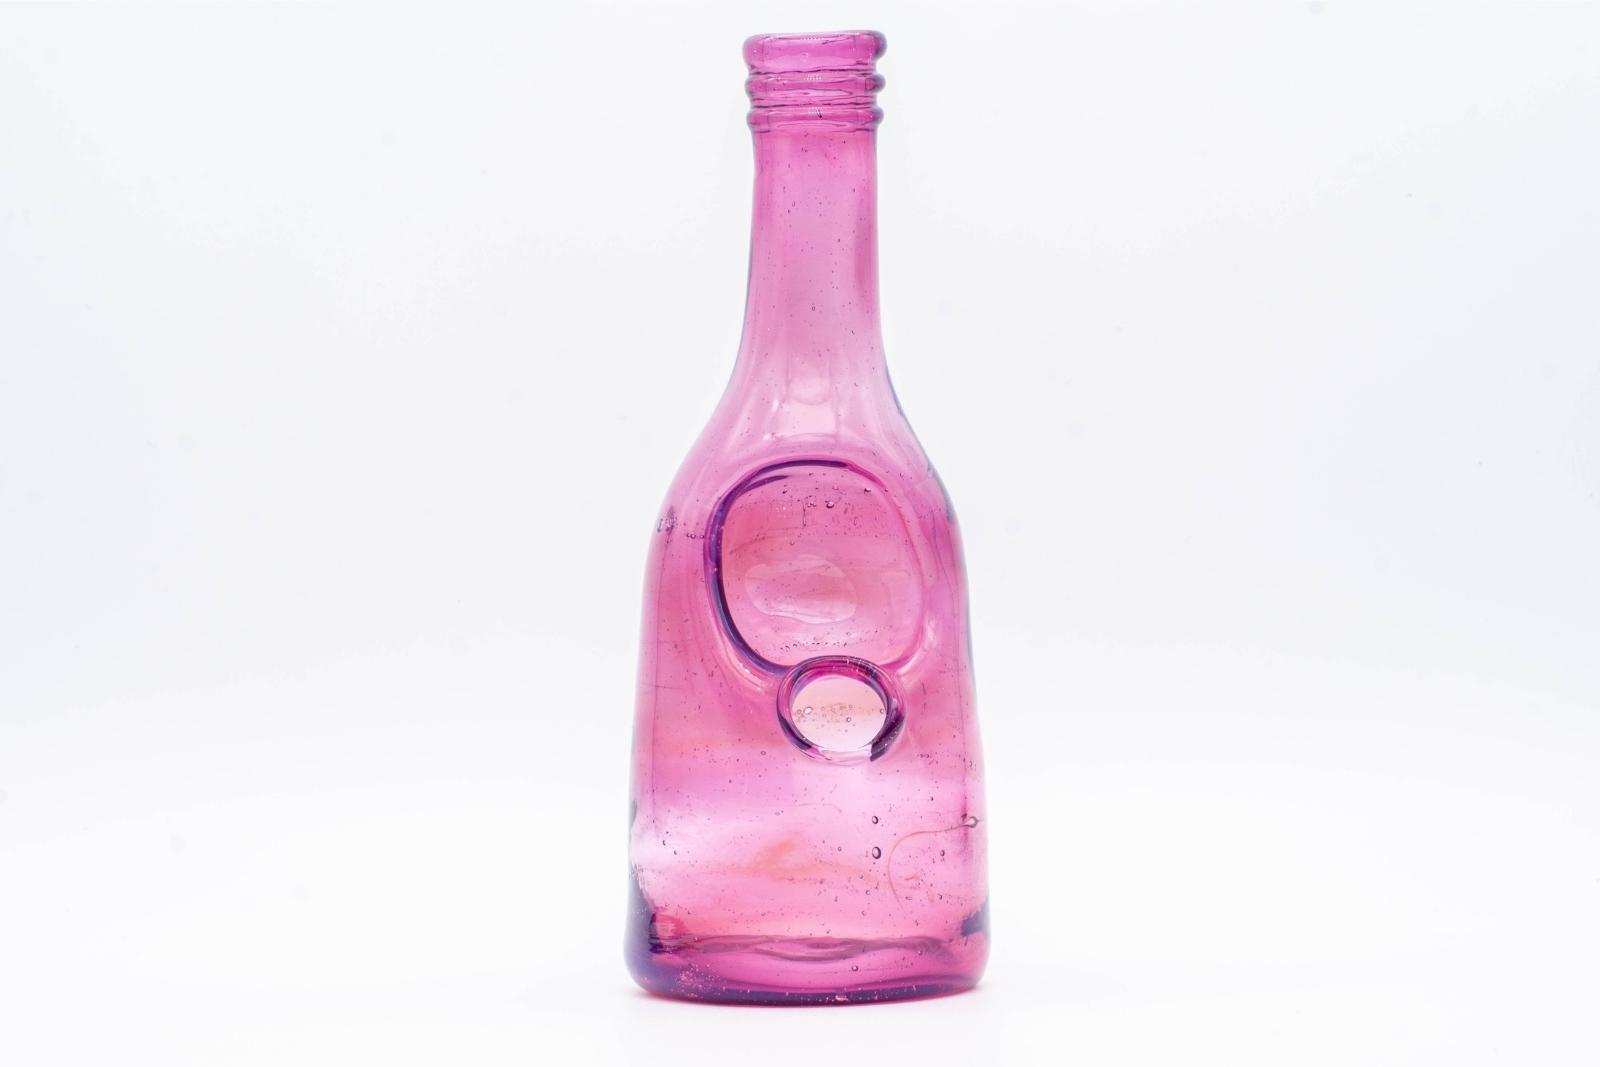 A purple sake bottle rig by Costa Glass, on a white background